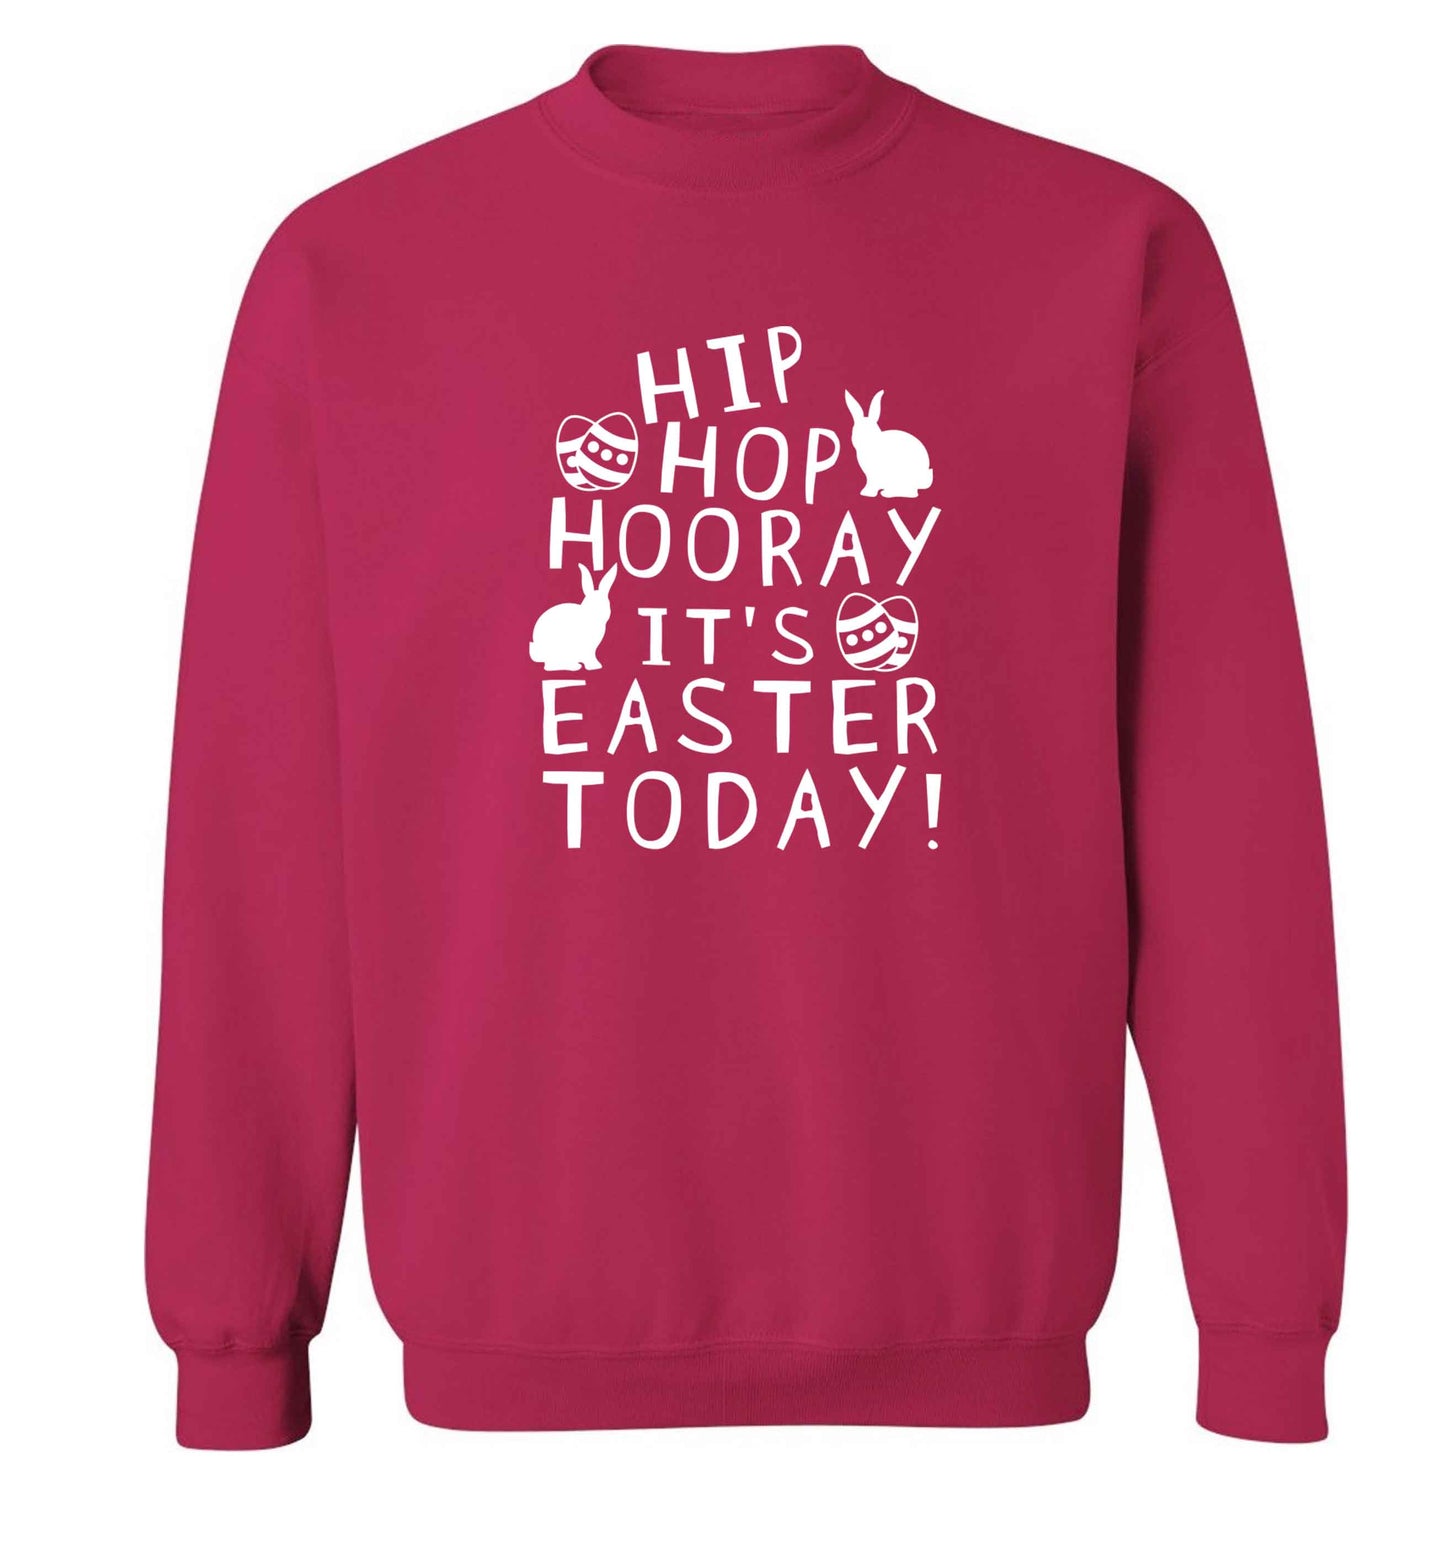 Hip hip hooray it's Easter today! adult's unisex pink sweater 2XL